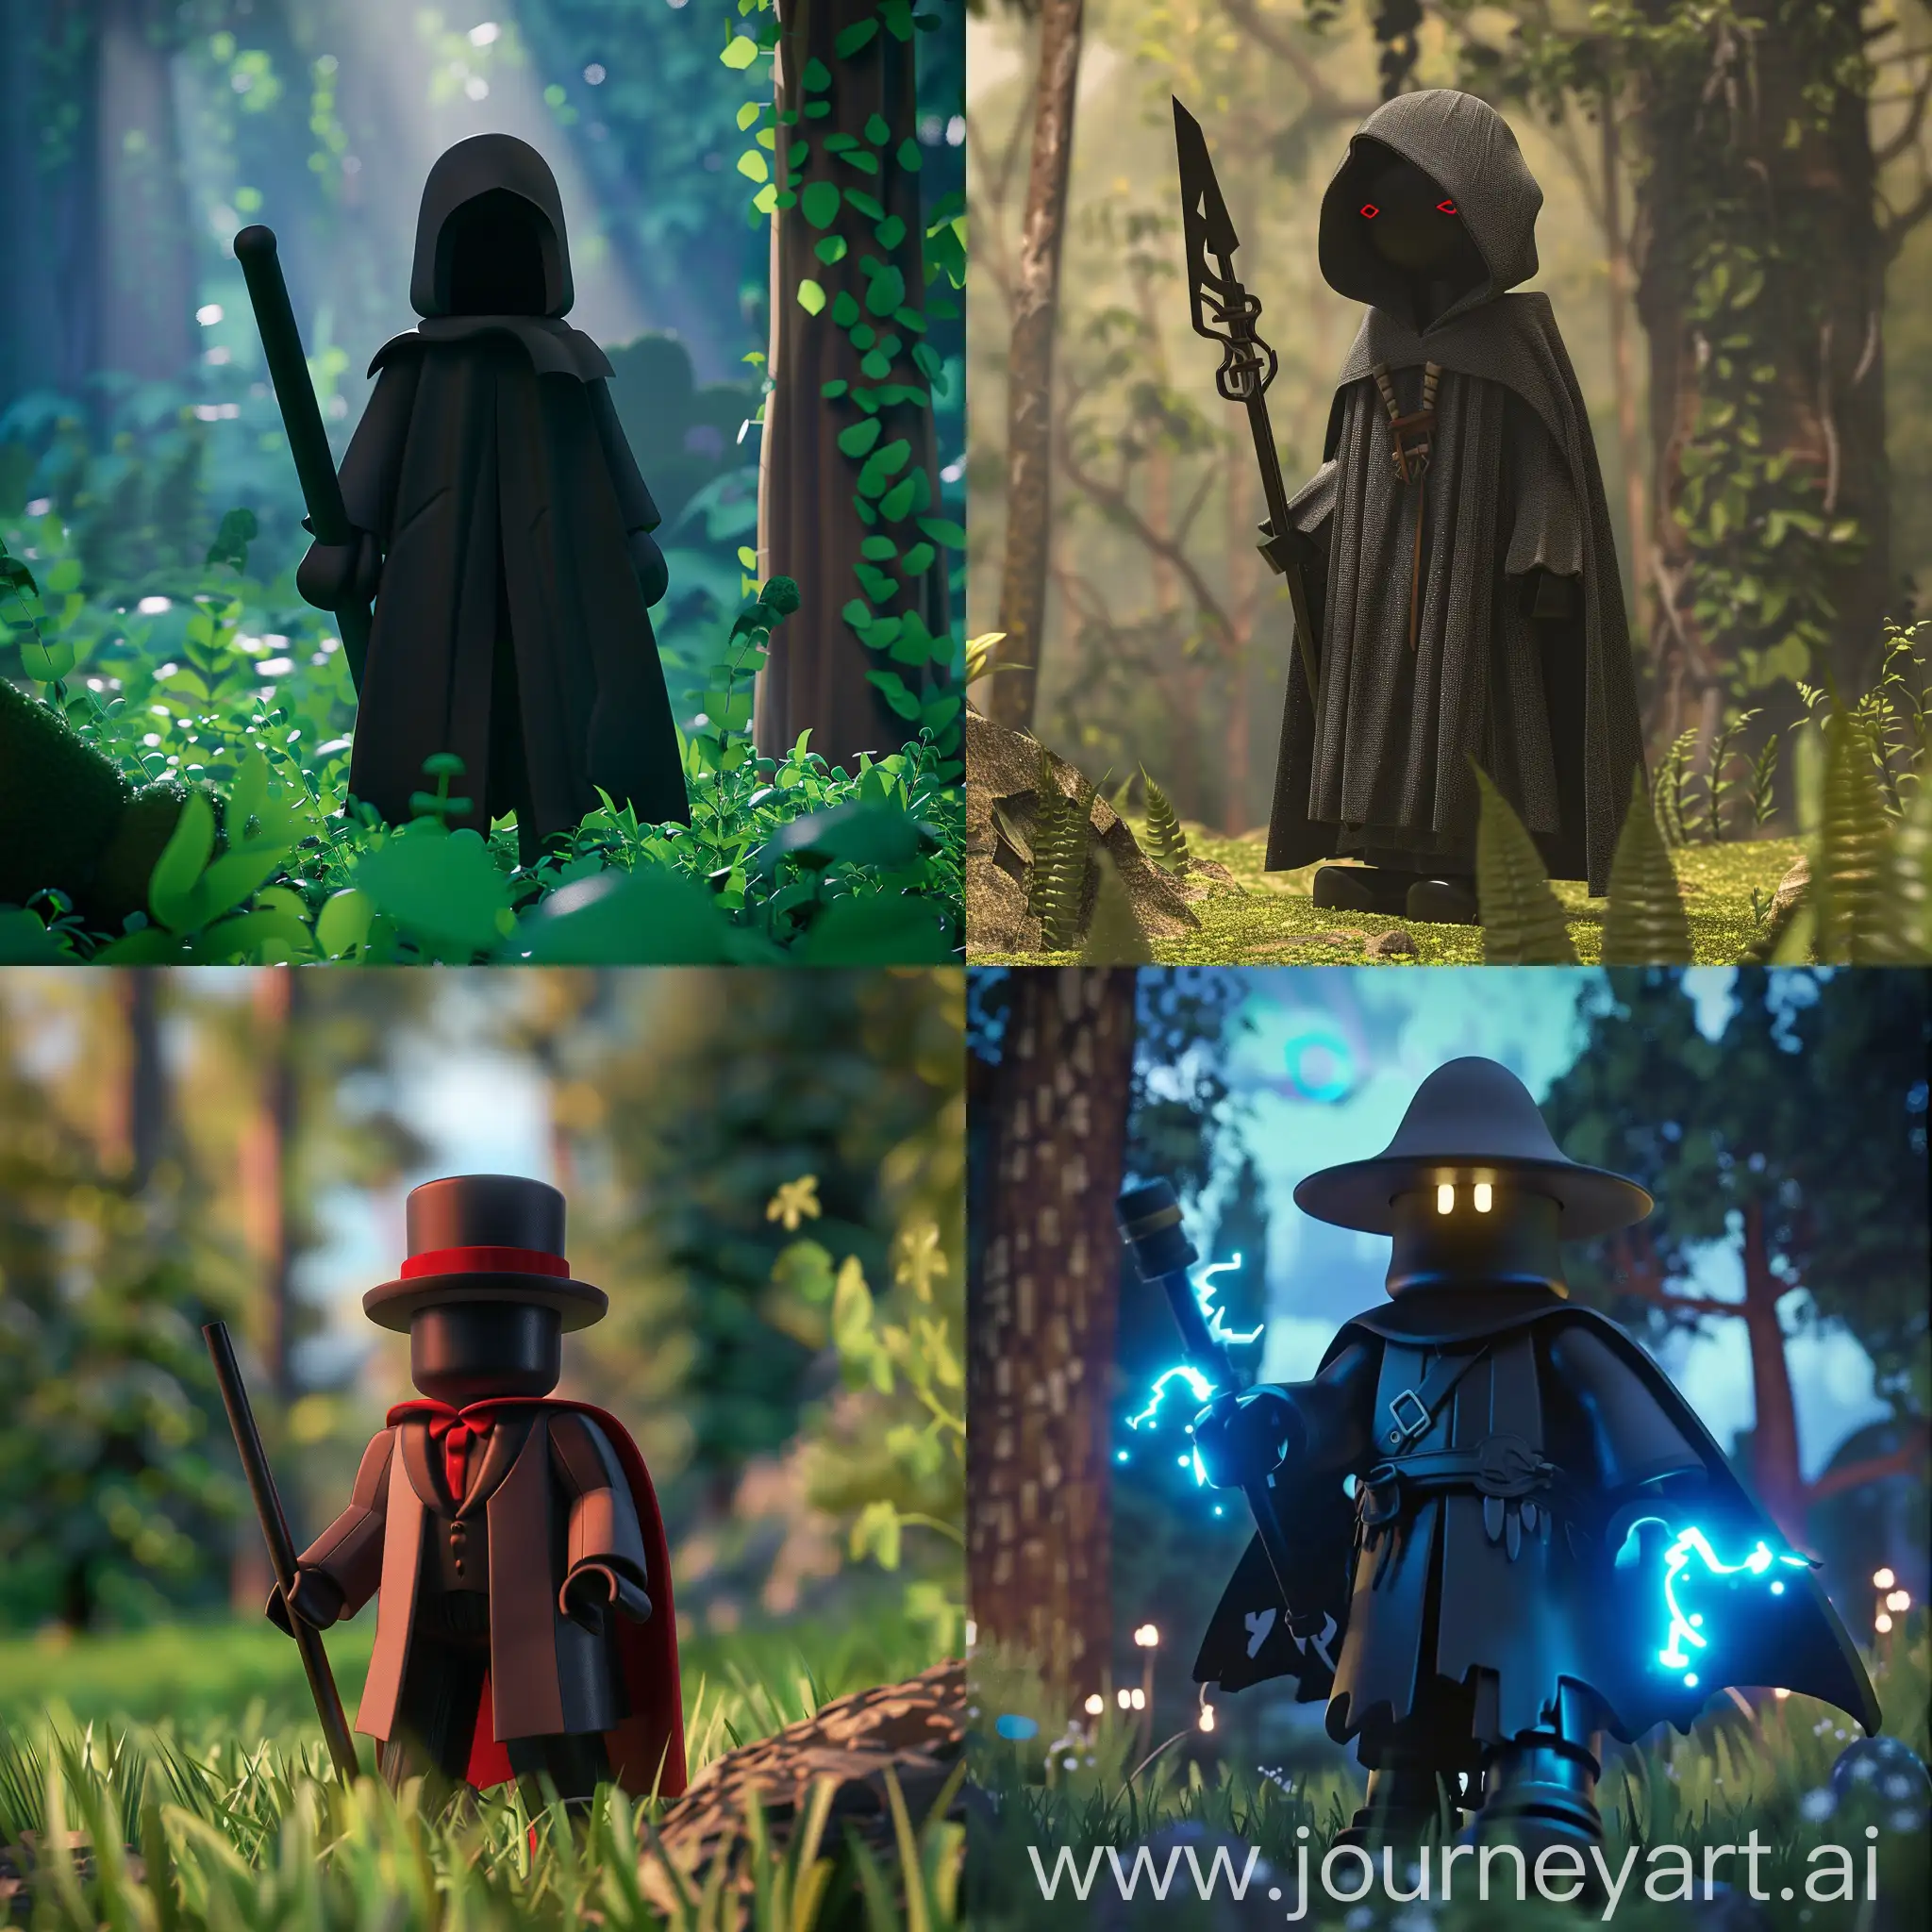 Mysterious-Roblox-Character-with-Cape-and-Cane-in-Forest-Glade